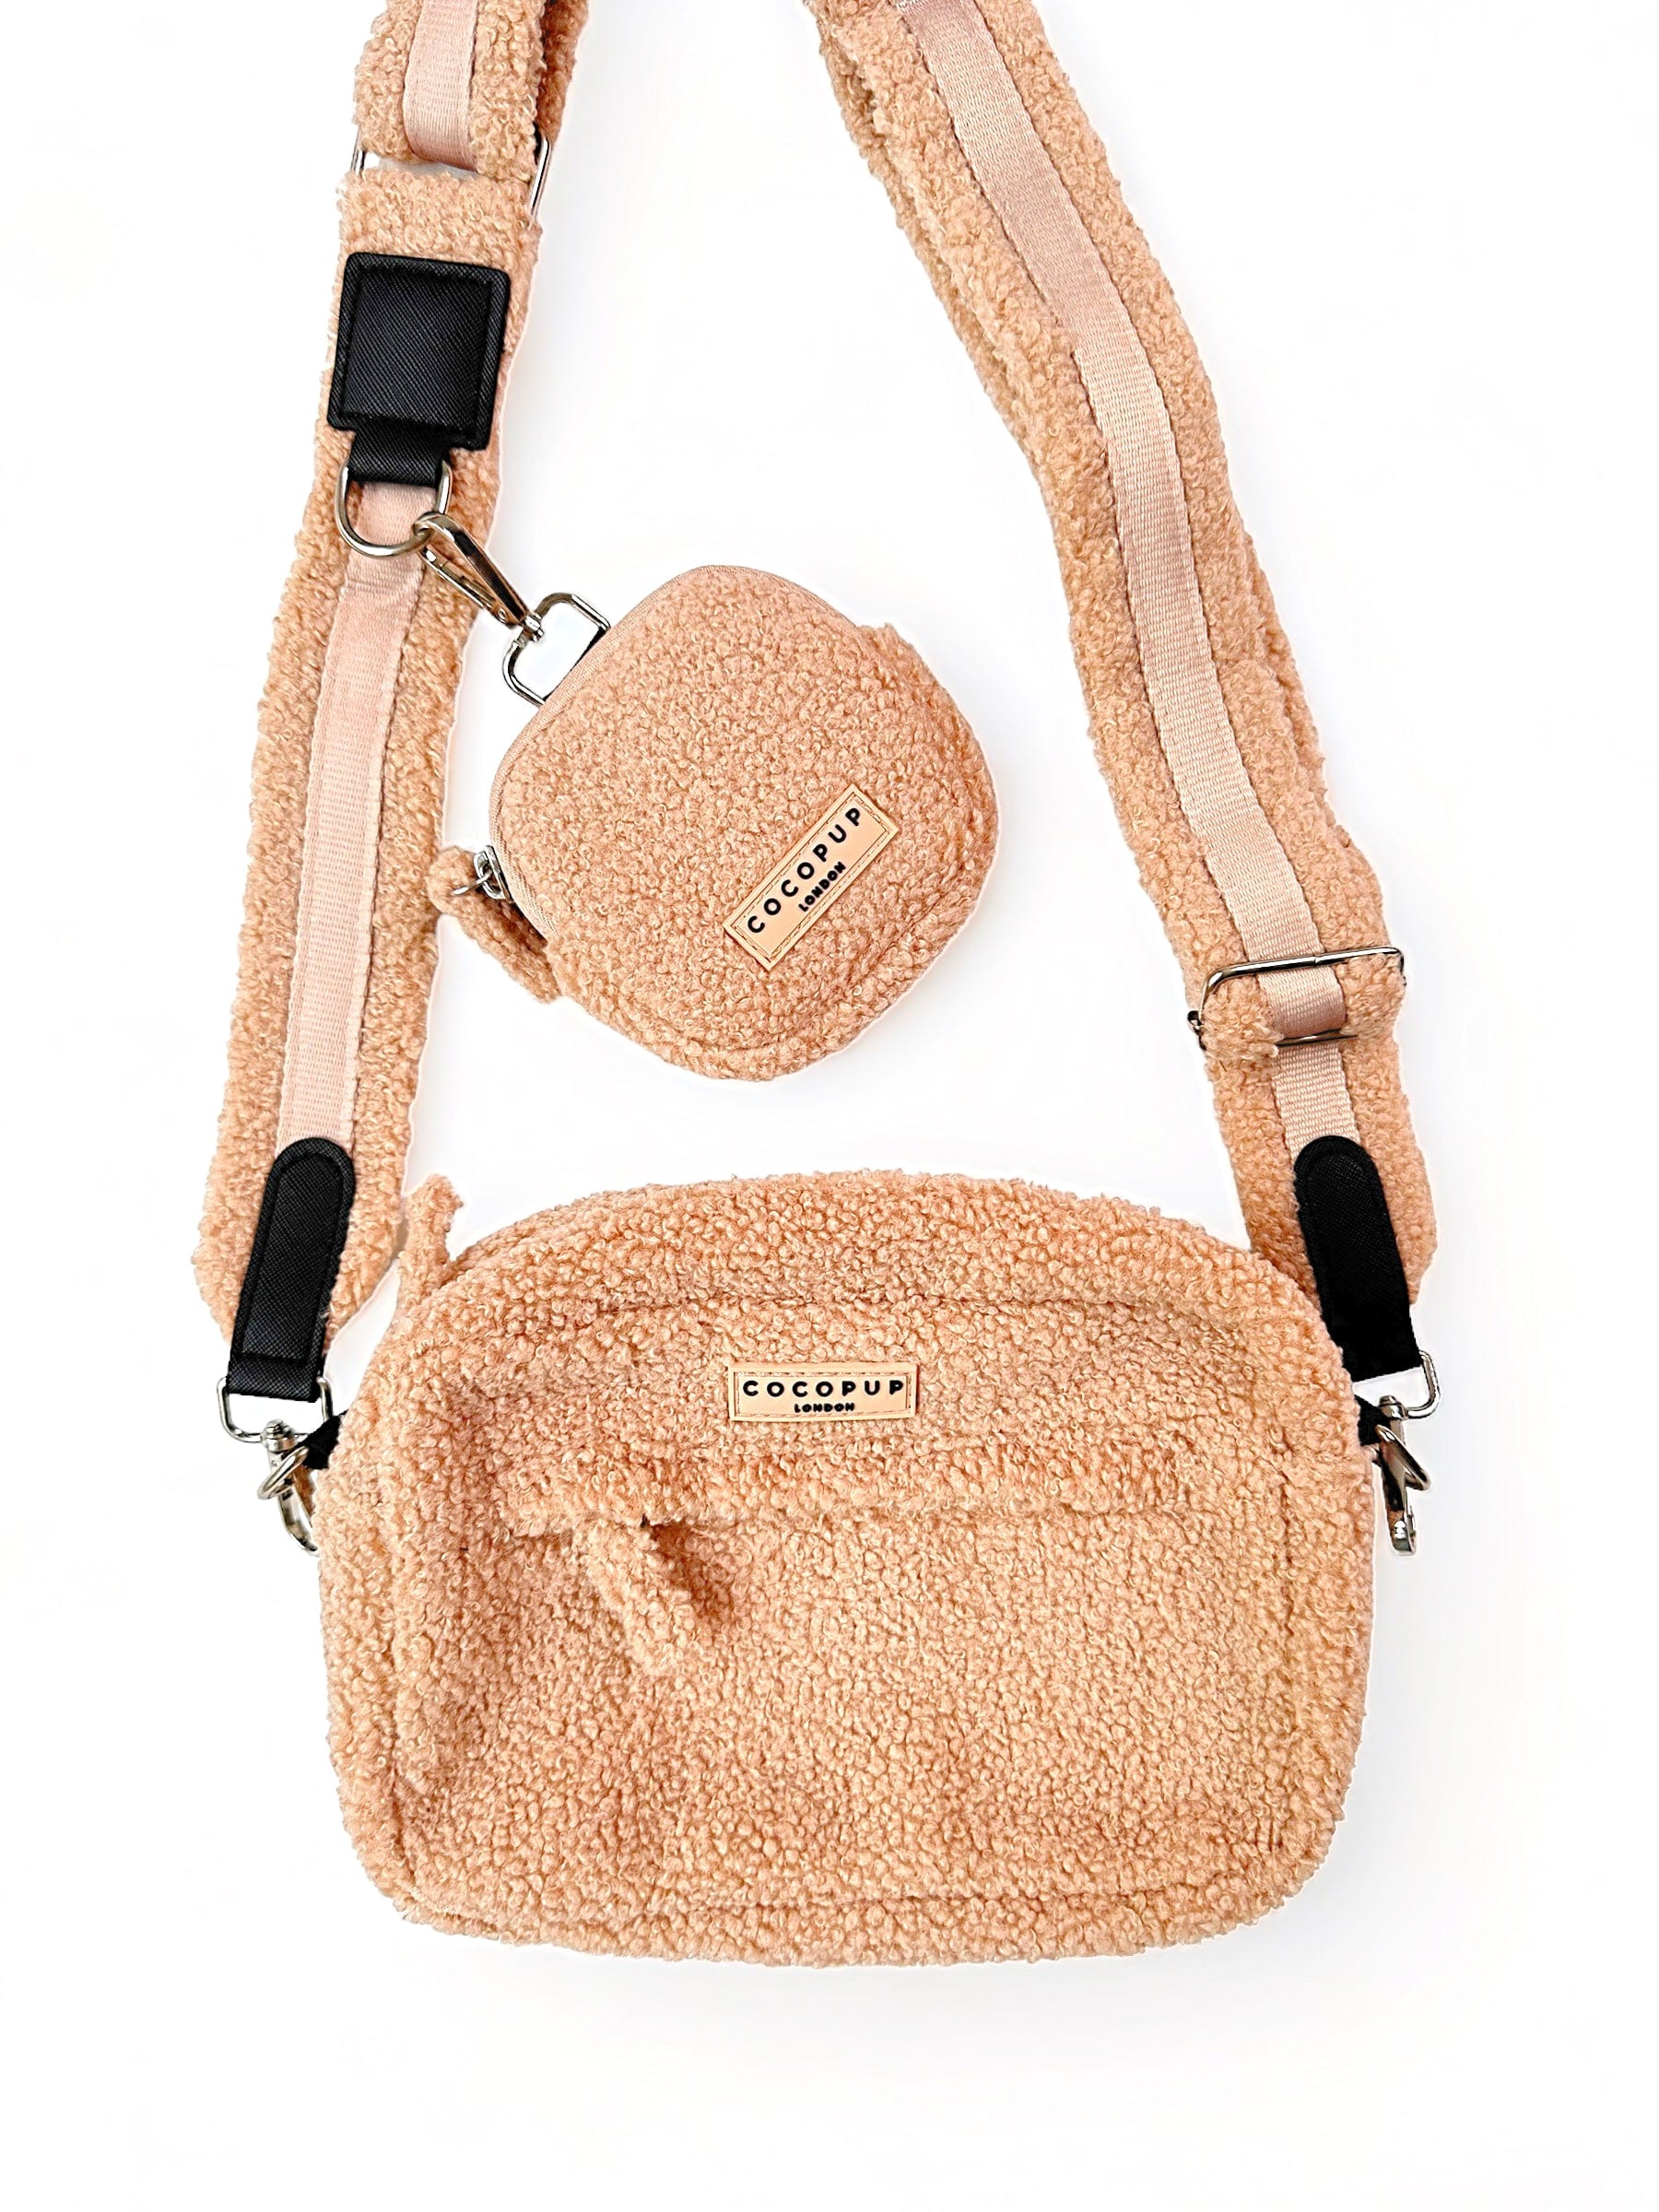 Dog Walking Bag and Accessories  - Teddy Rupert by Cocopup London